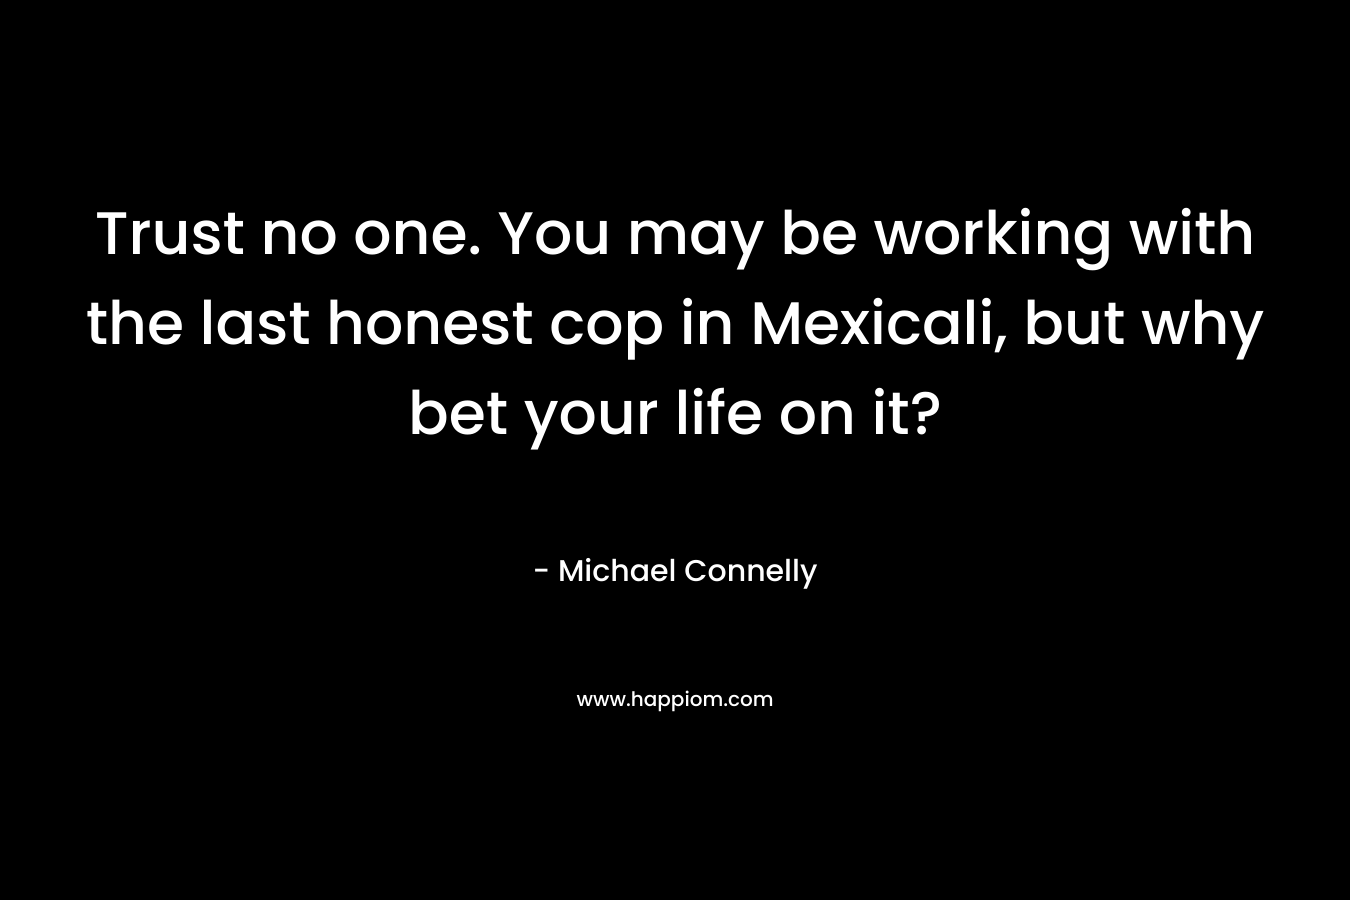 Trust no one. You may be working with the last honest cop in Mexicali, but why bet your life on it?